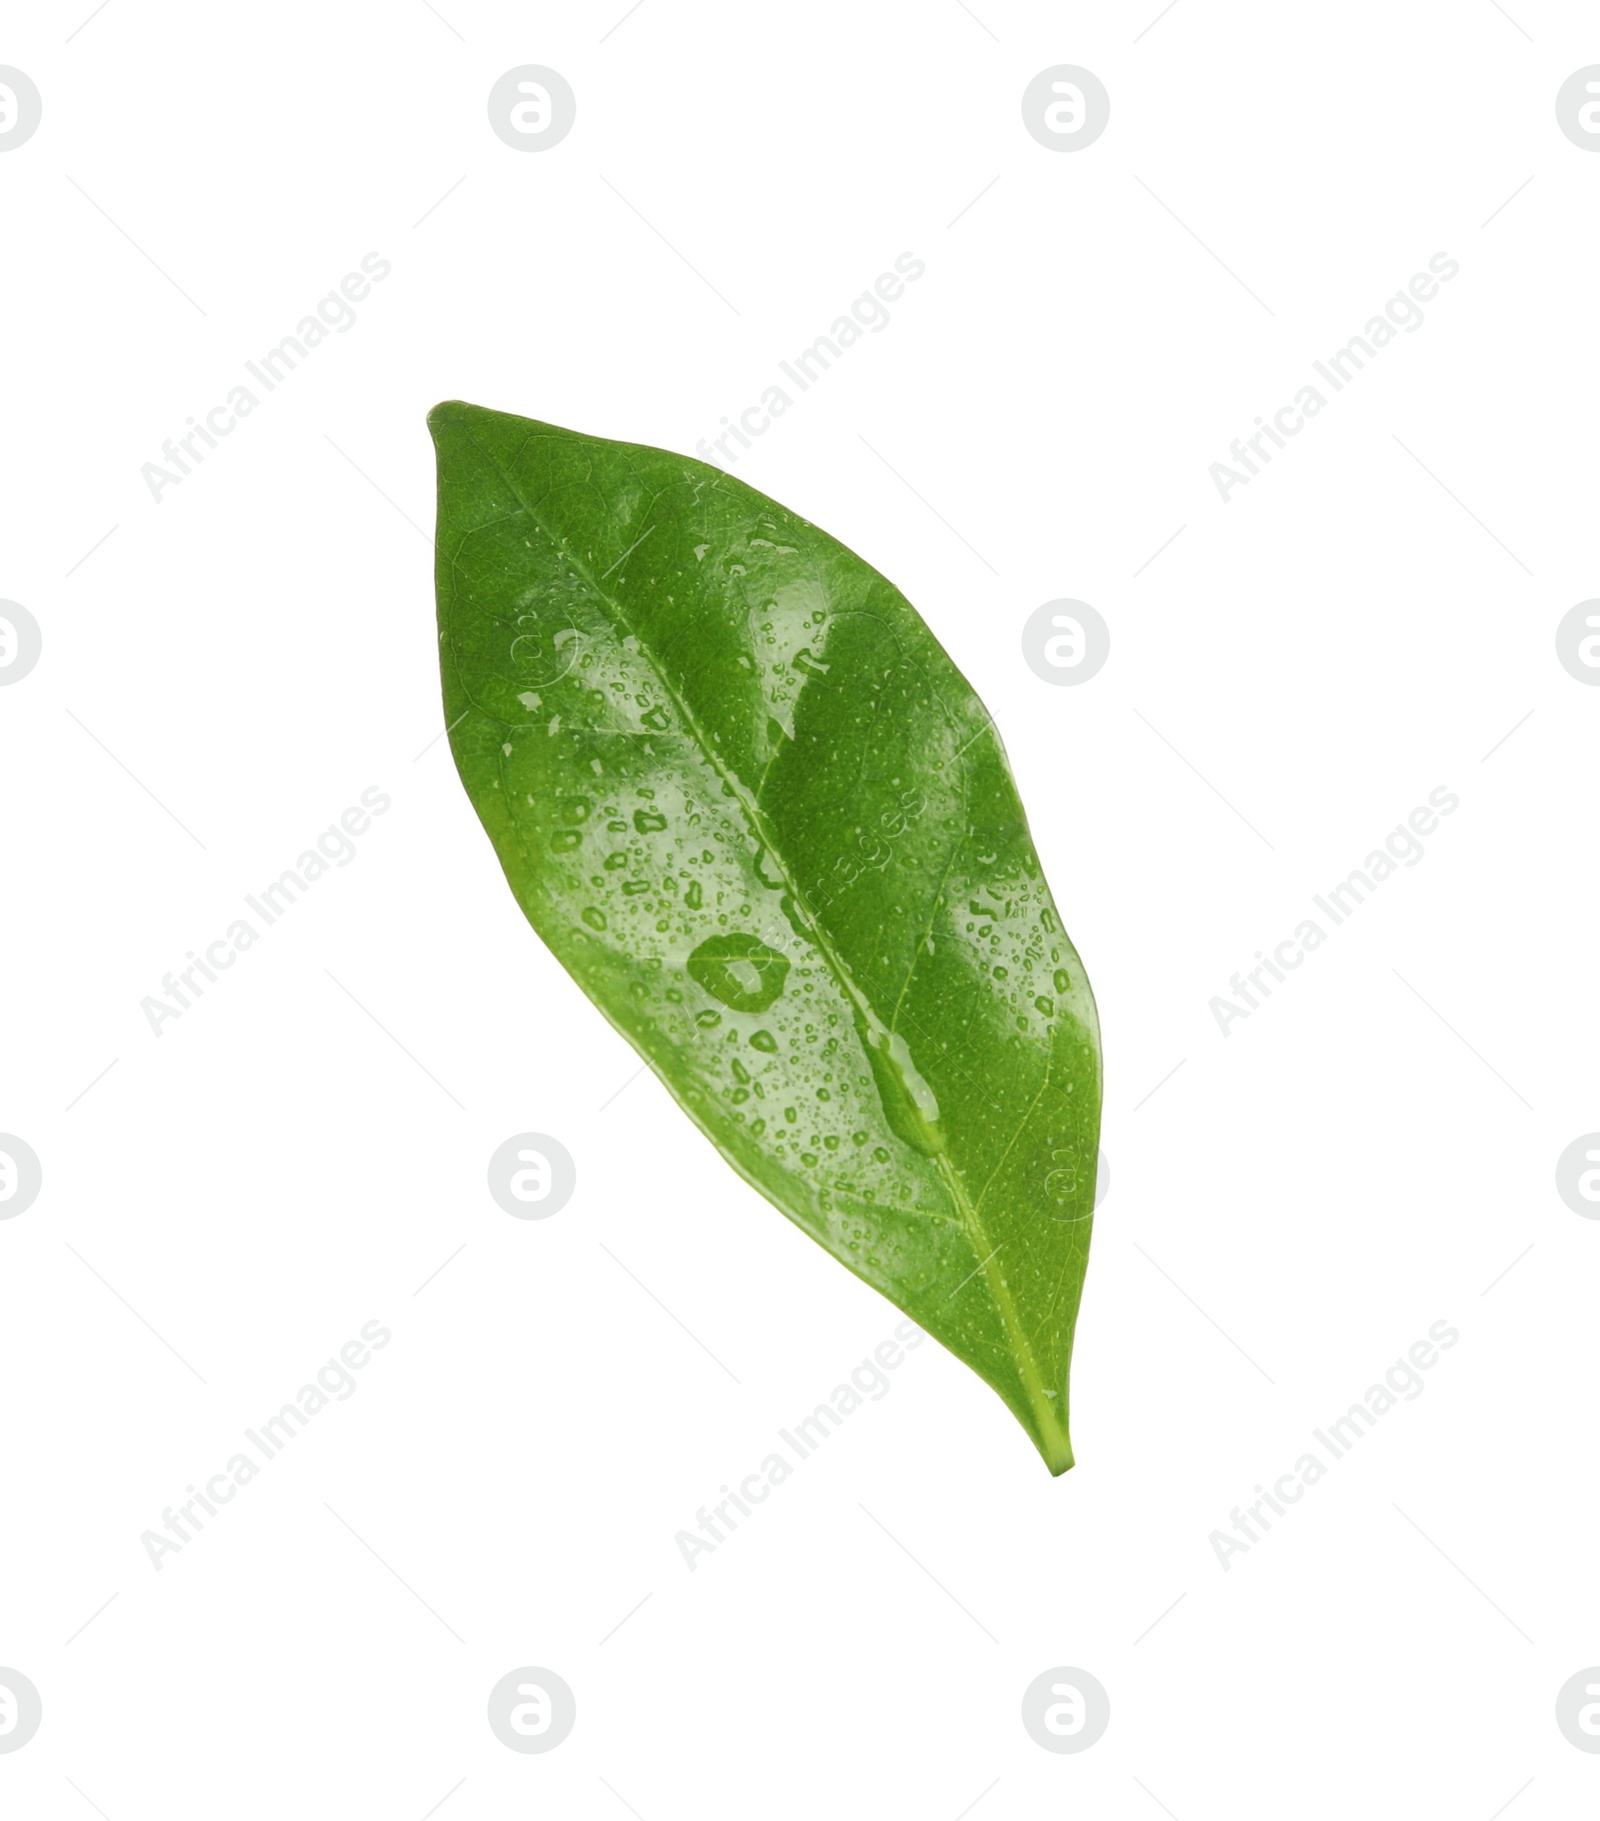 Photo of Leaf of coffee plant with water drops isolated on white